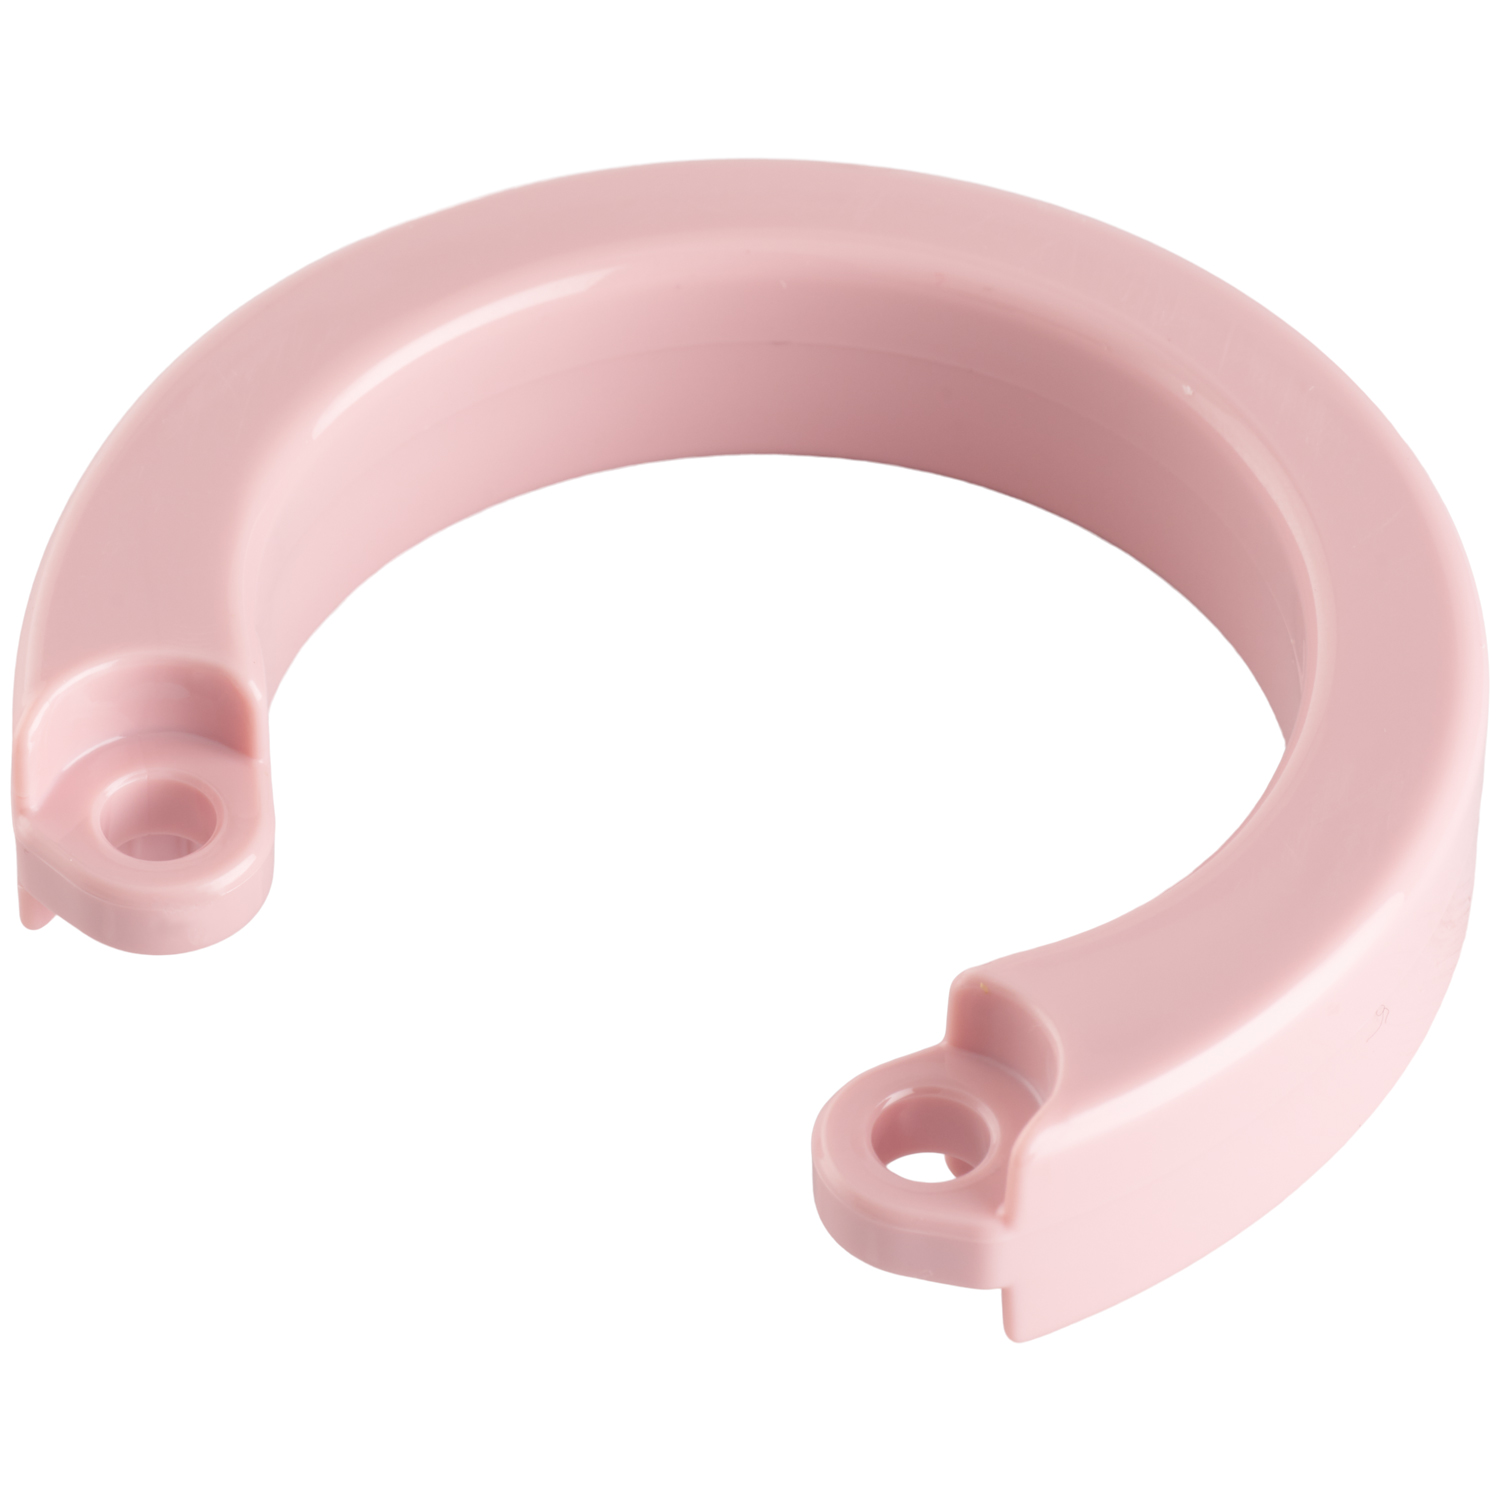 24719-u-ring-for-cb-chastity-device-pink_01_q100